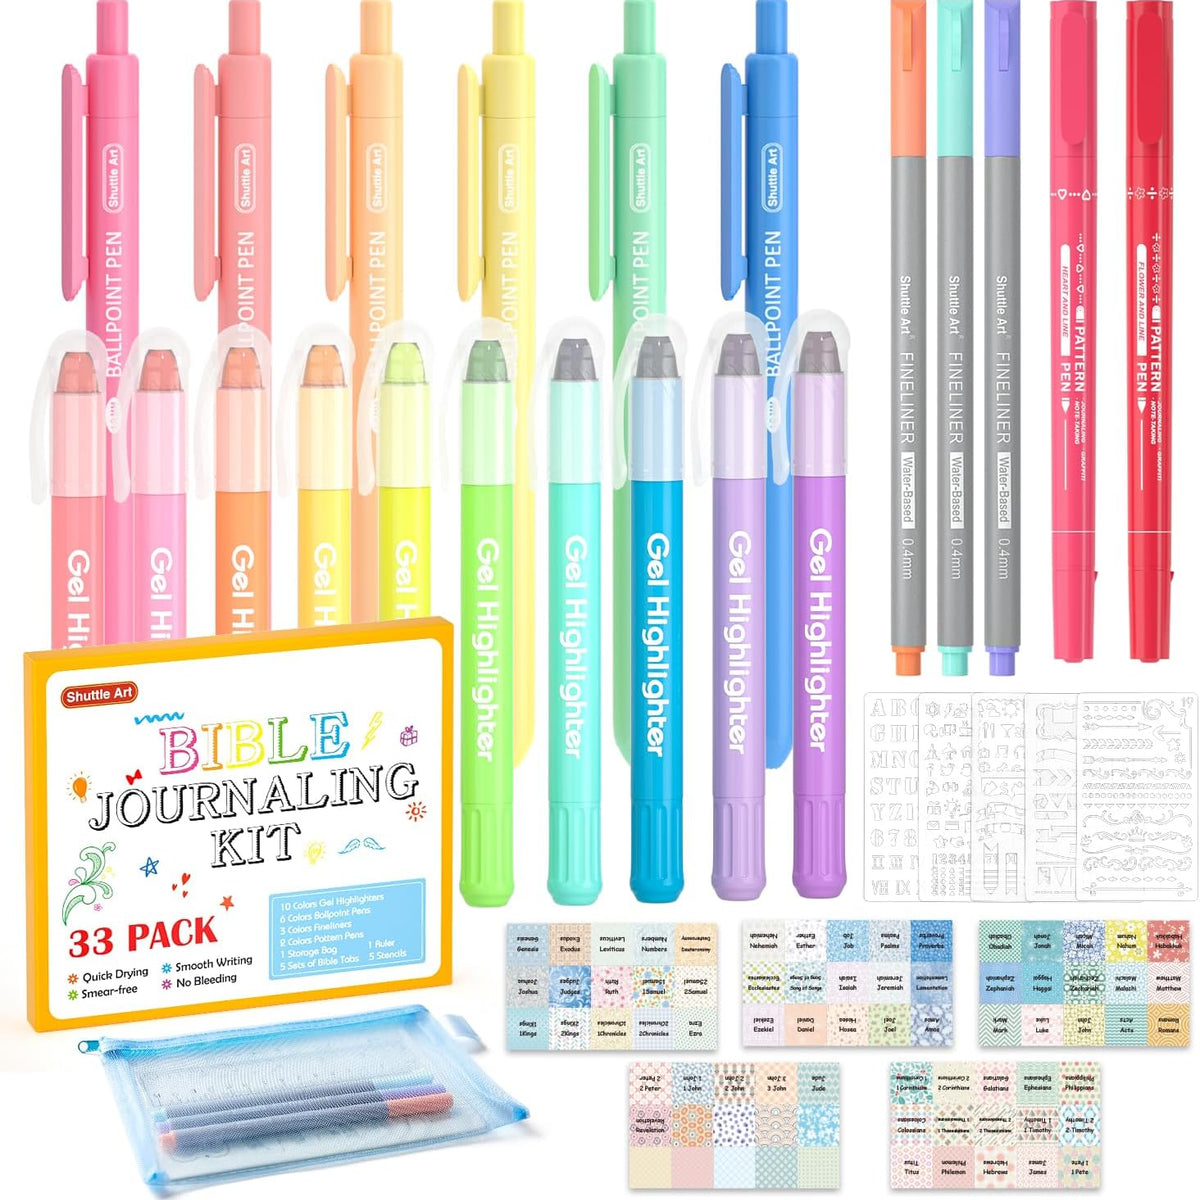 Feela 24 Pack Gel Highlighters, 12 Assorted Colors Bible Highlighter Markers  Journaling Supplies, No Bleed Through For Highlighting Journal School  Office 